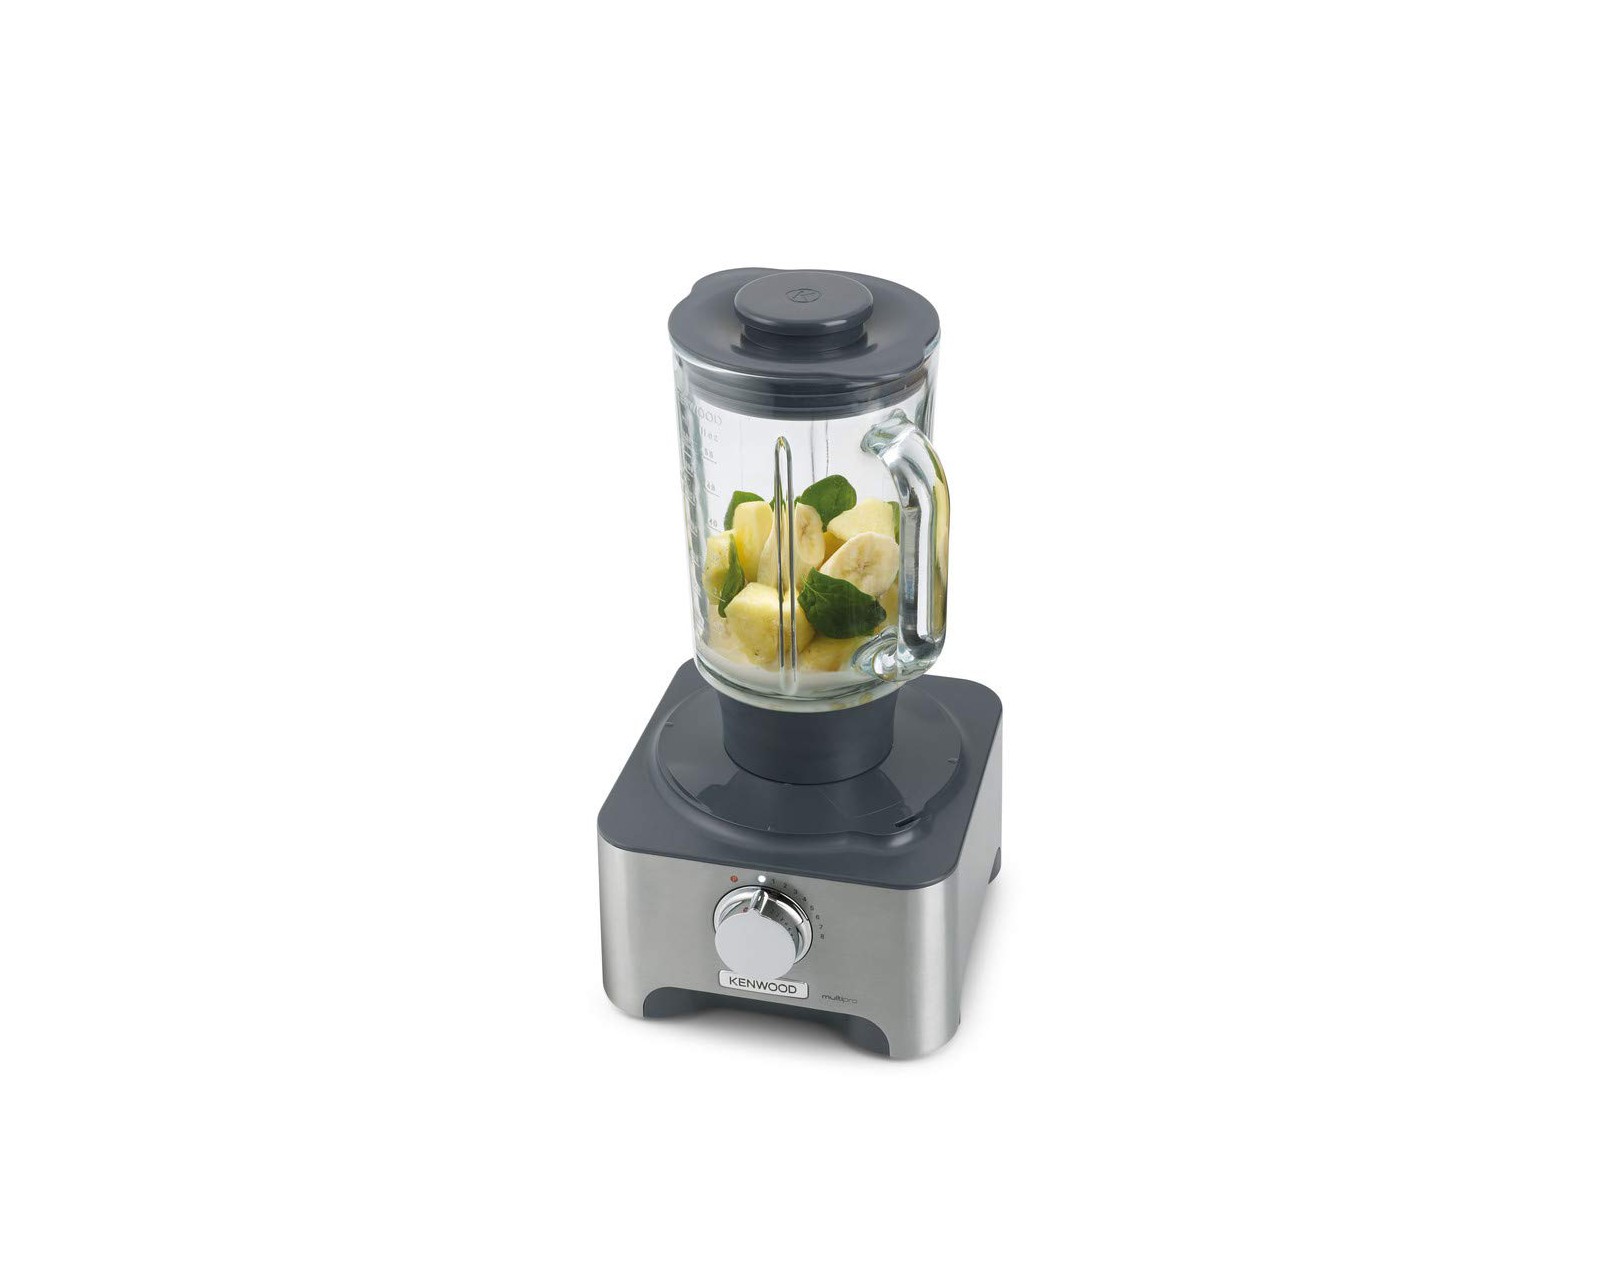 Kenwood multipro classic food processor complete review and testing